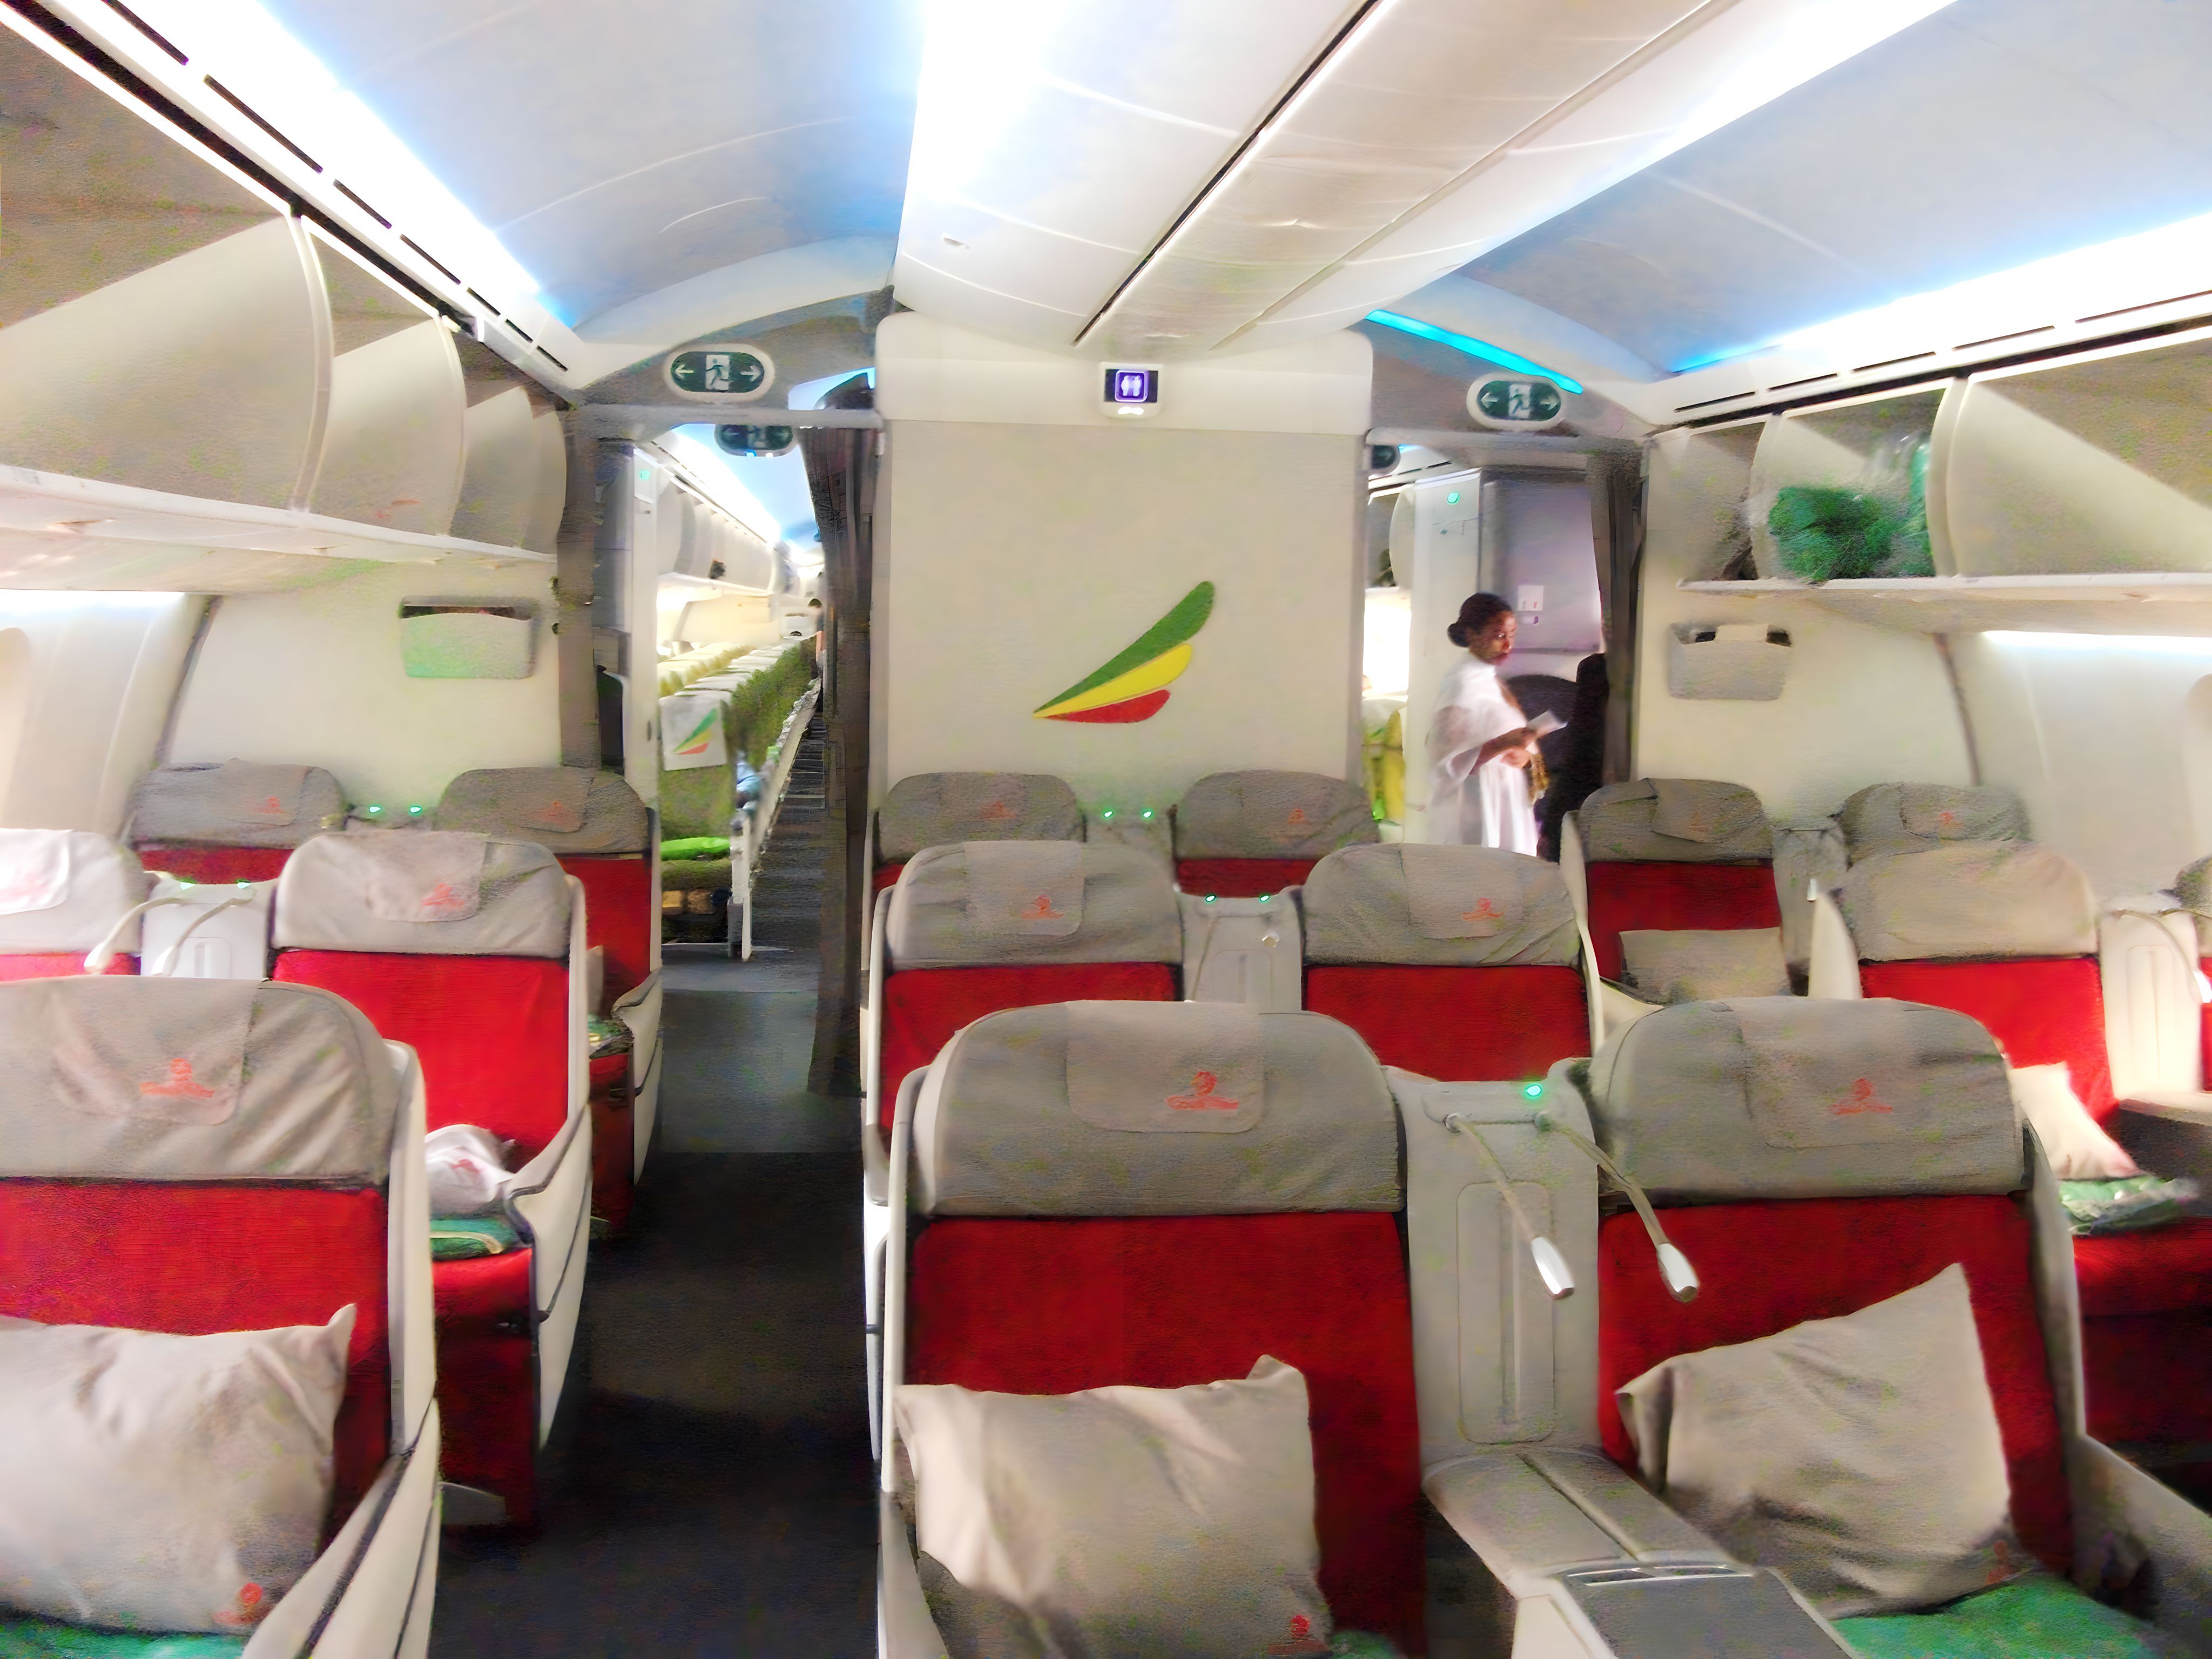 Inside Ethiopian Airlines 787 business class cabin.